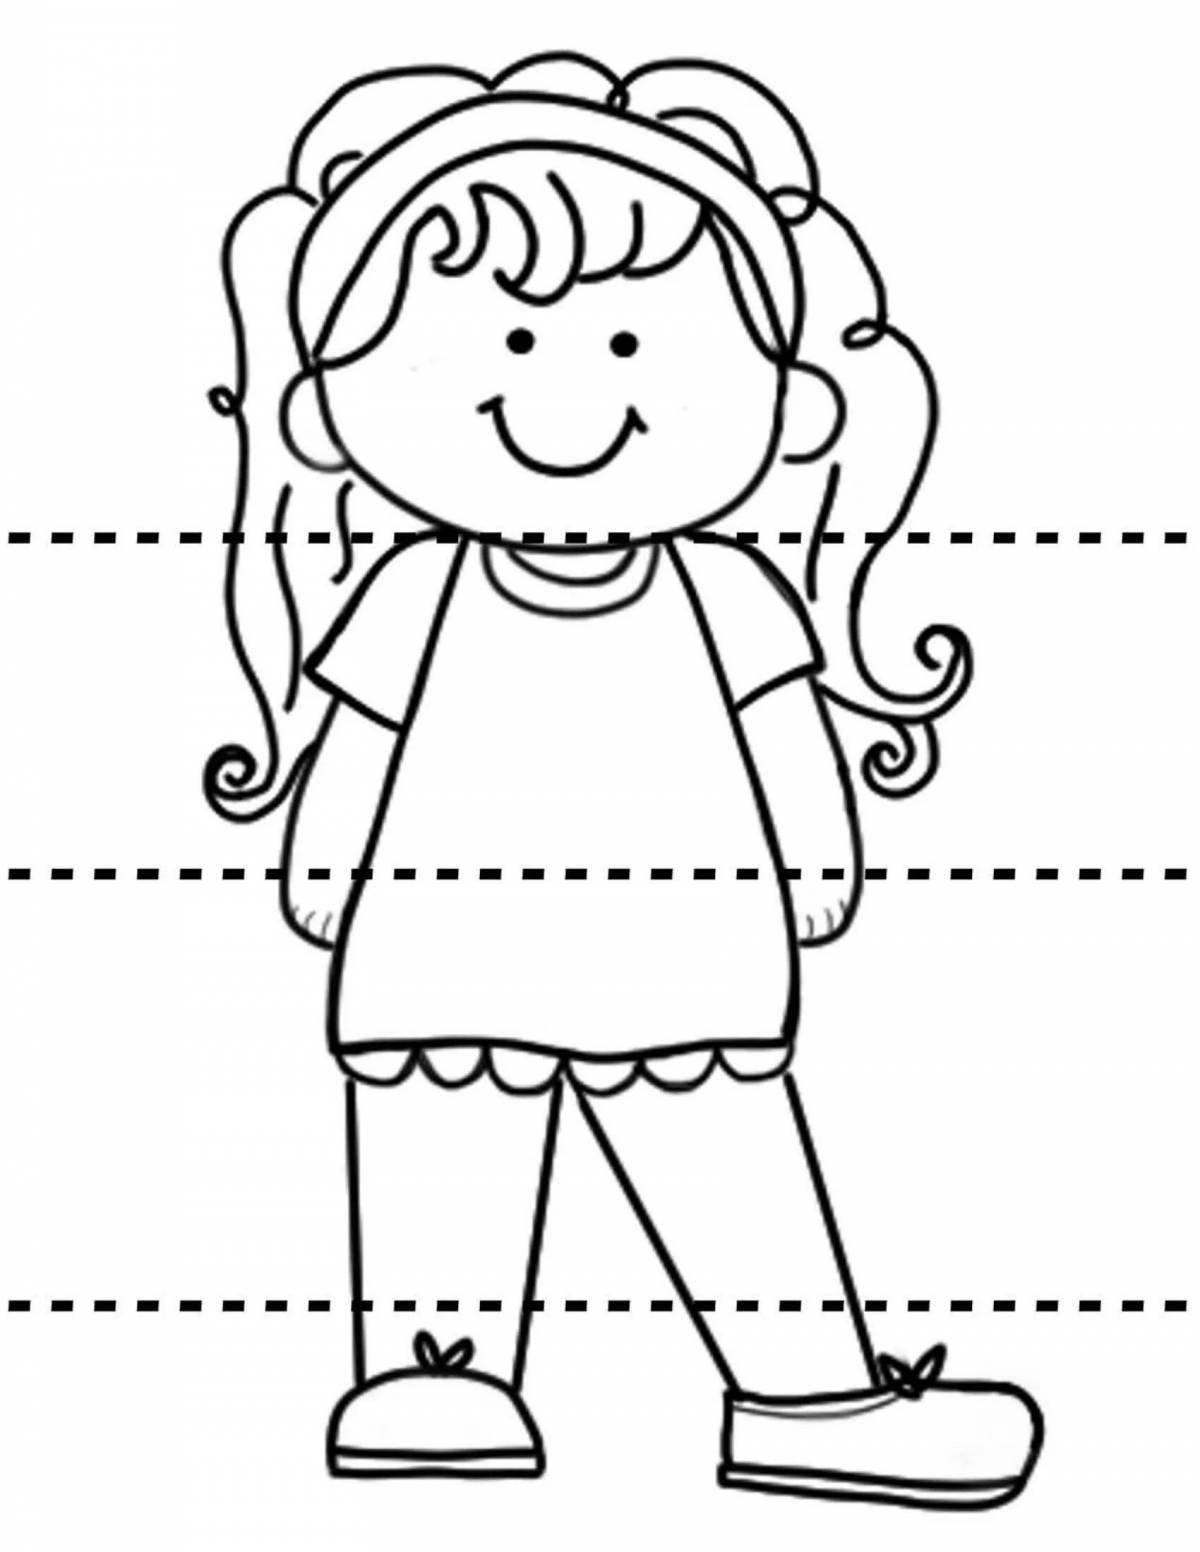 Gorgeous people coloring book for preschoolers